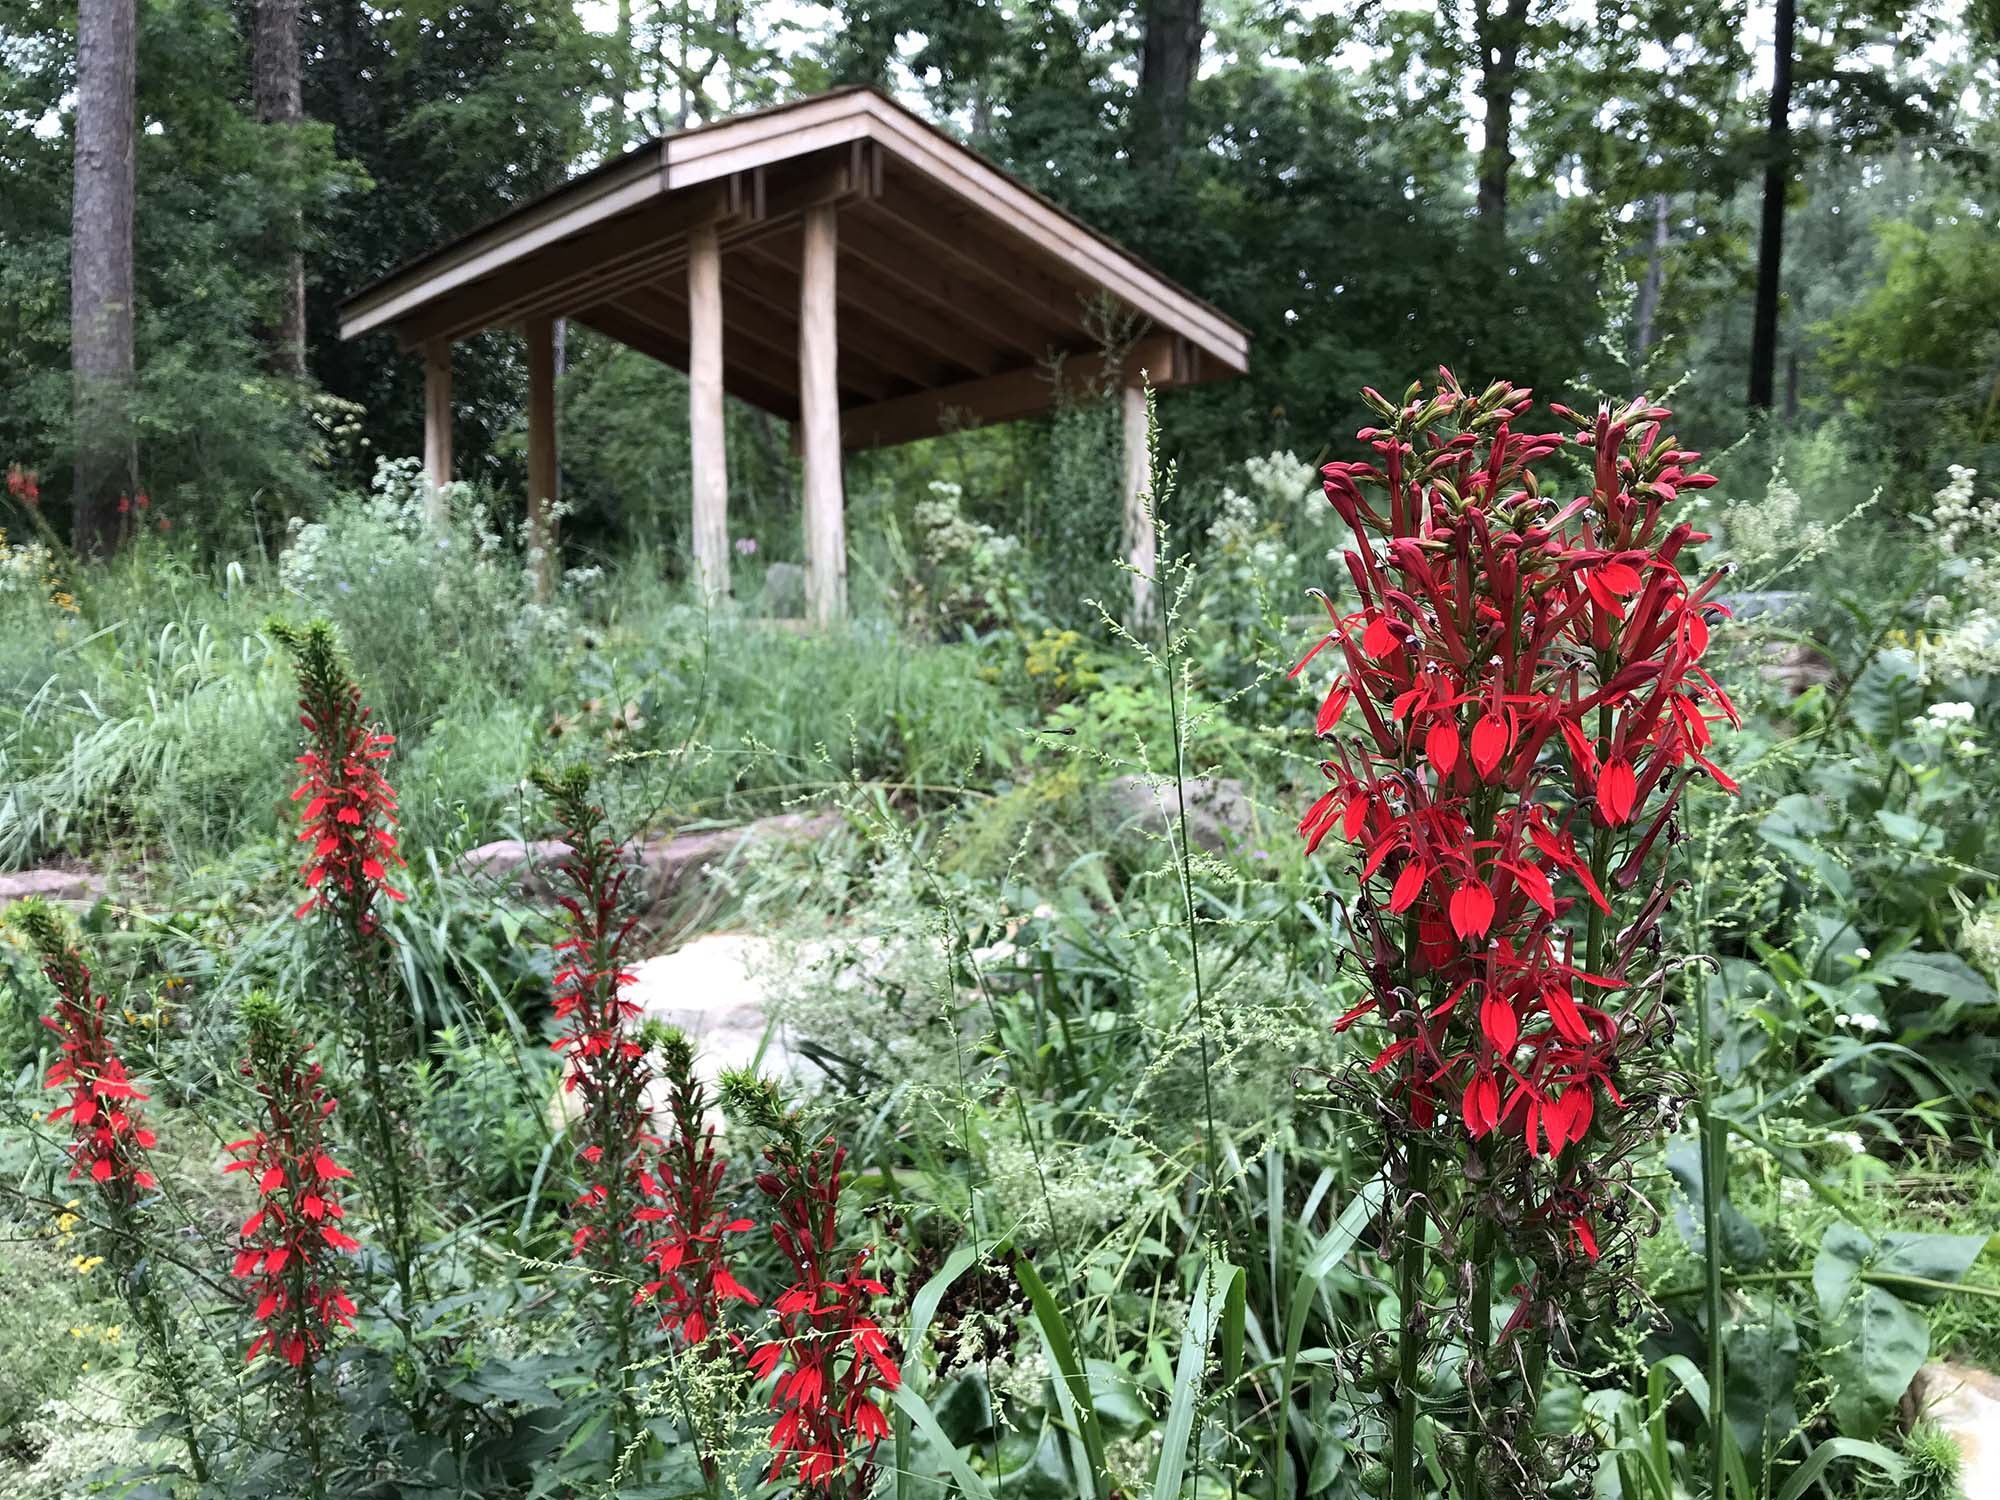 Cardinal flowers (Lobelia cardinalis) bloom in front of the new south entrance to the Blomquist Garden.